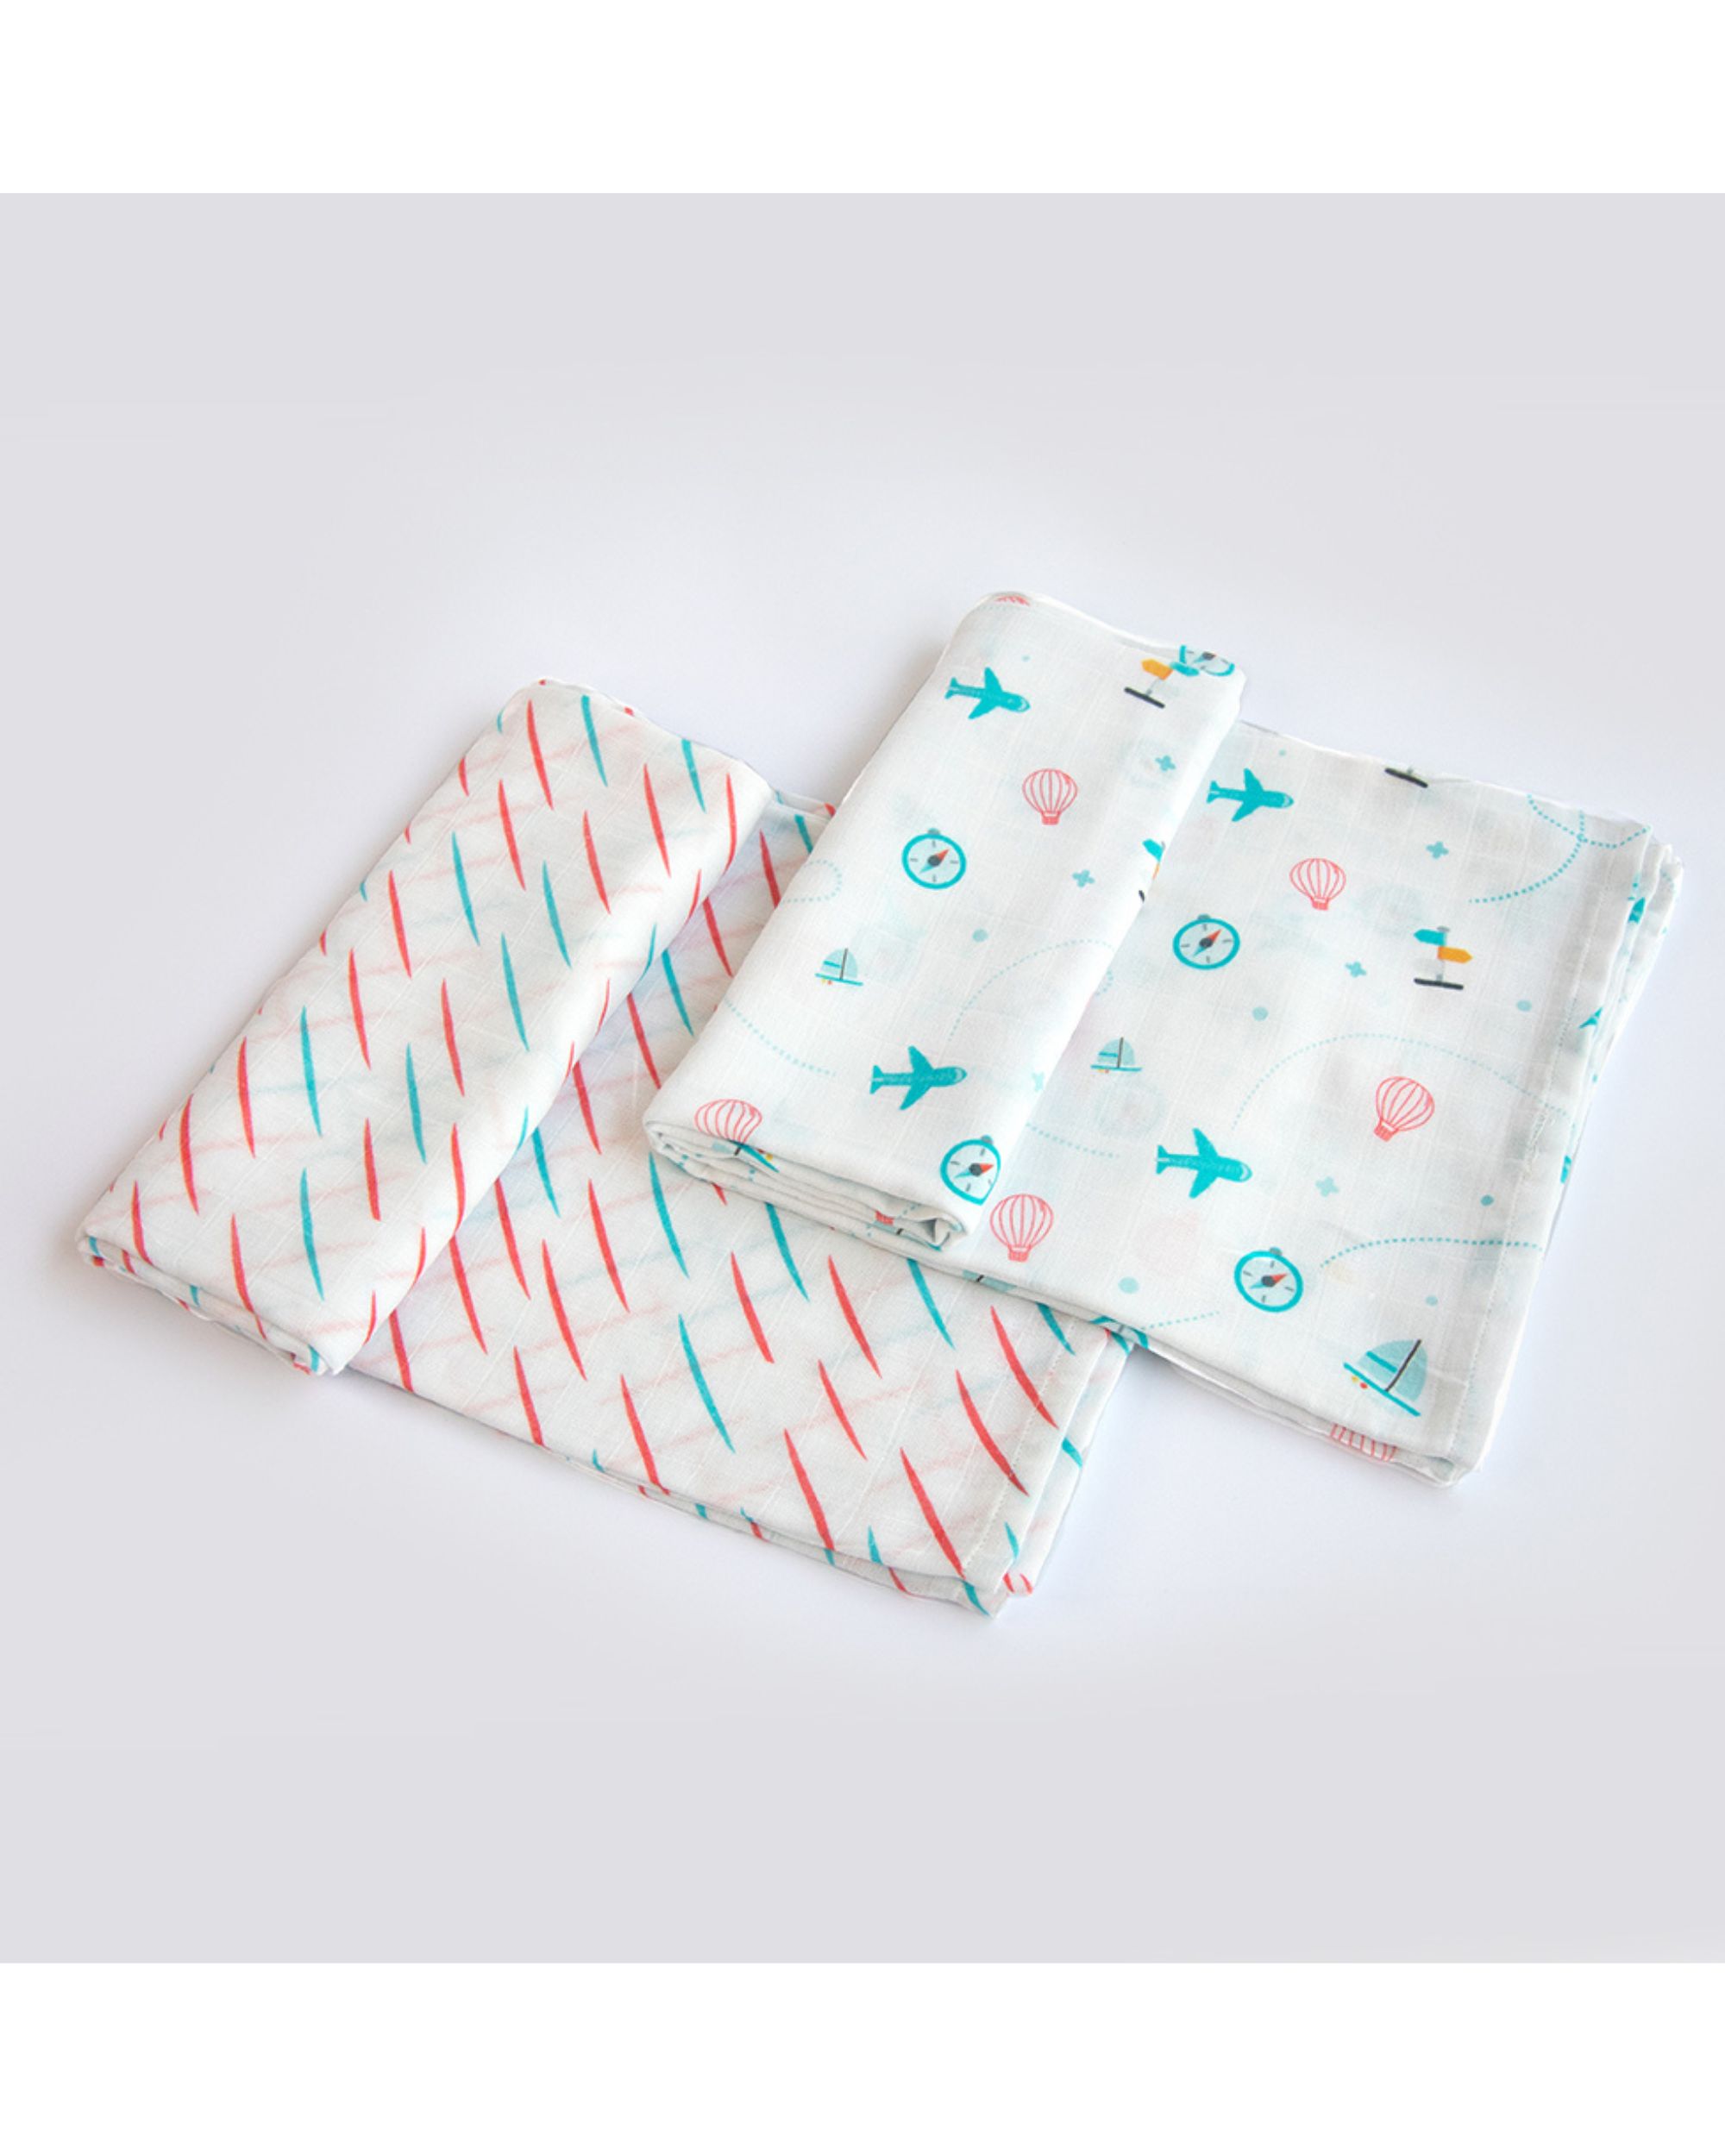 Lil travel and rain themed swaddle set - set of two